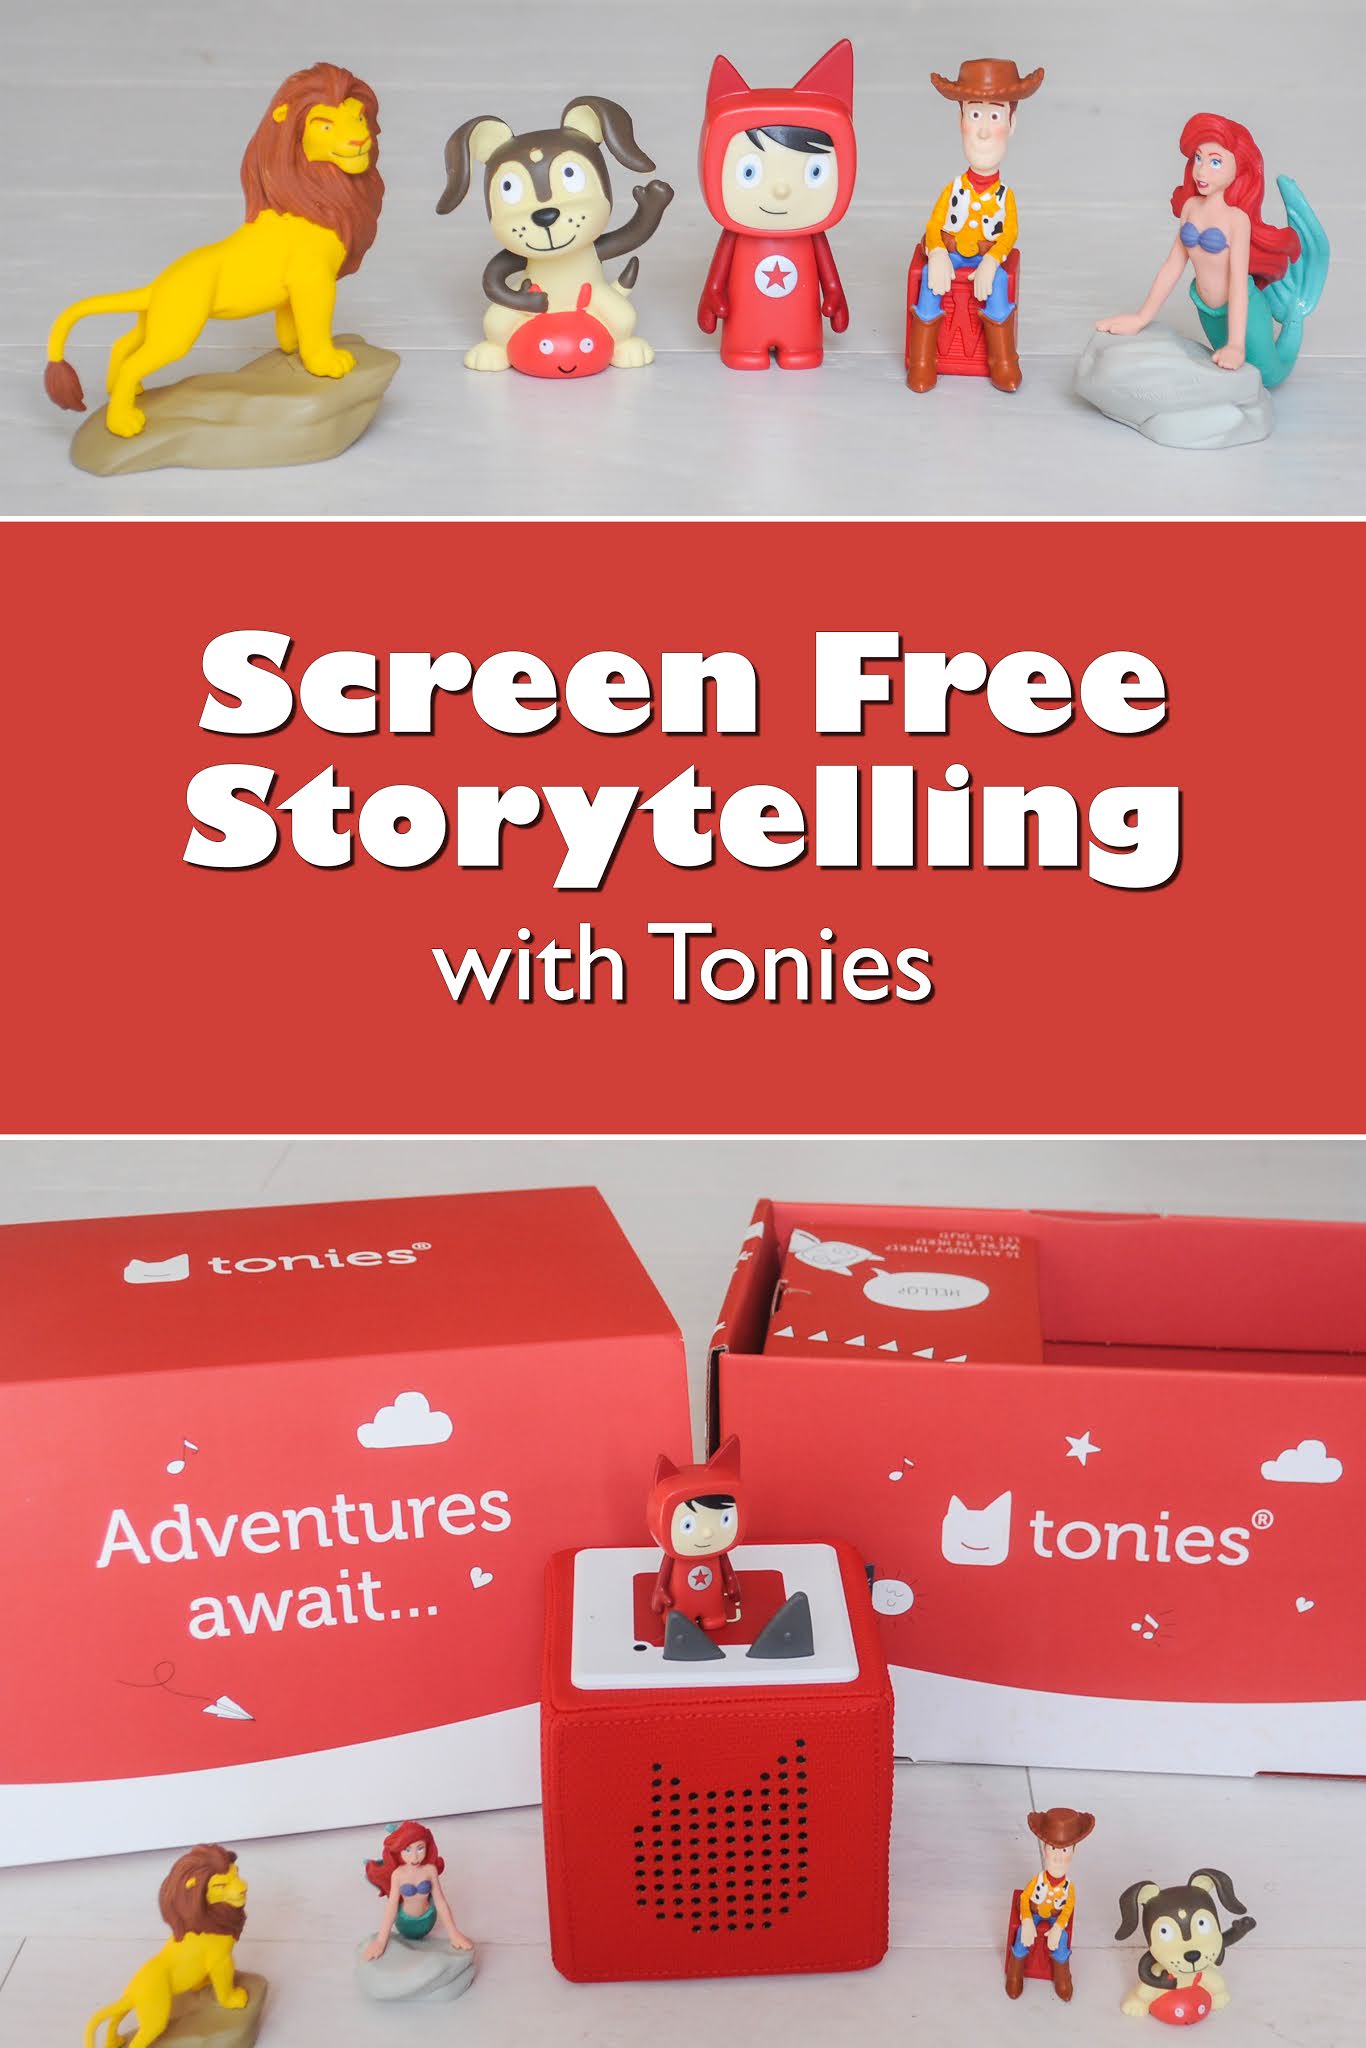 Screen Free Storytelling with Tonies!